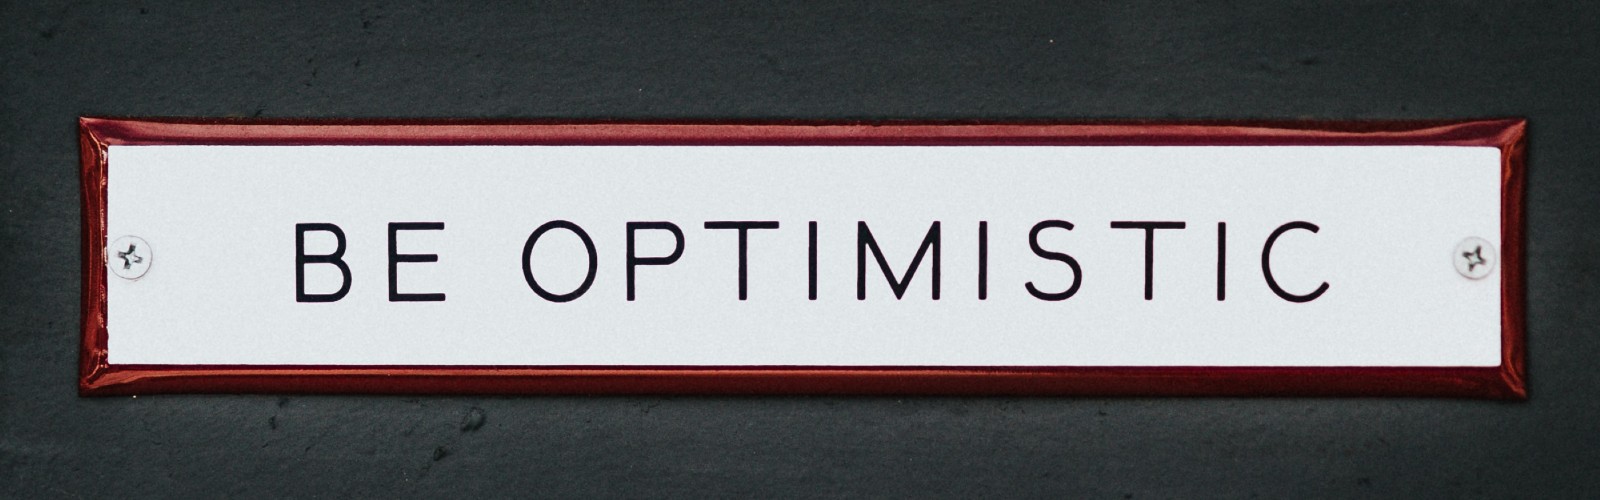 Photo of text "Be Optimistic" written in Black Capital Letters in a White Background